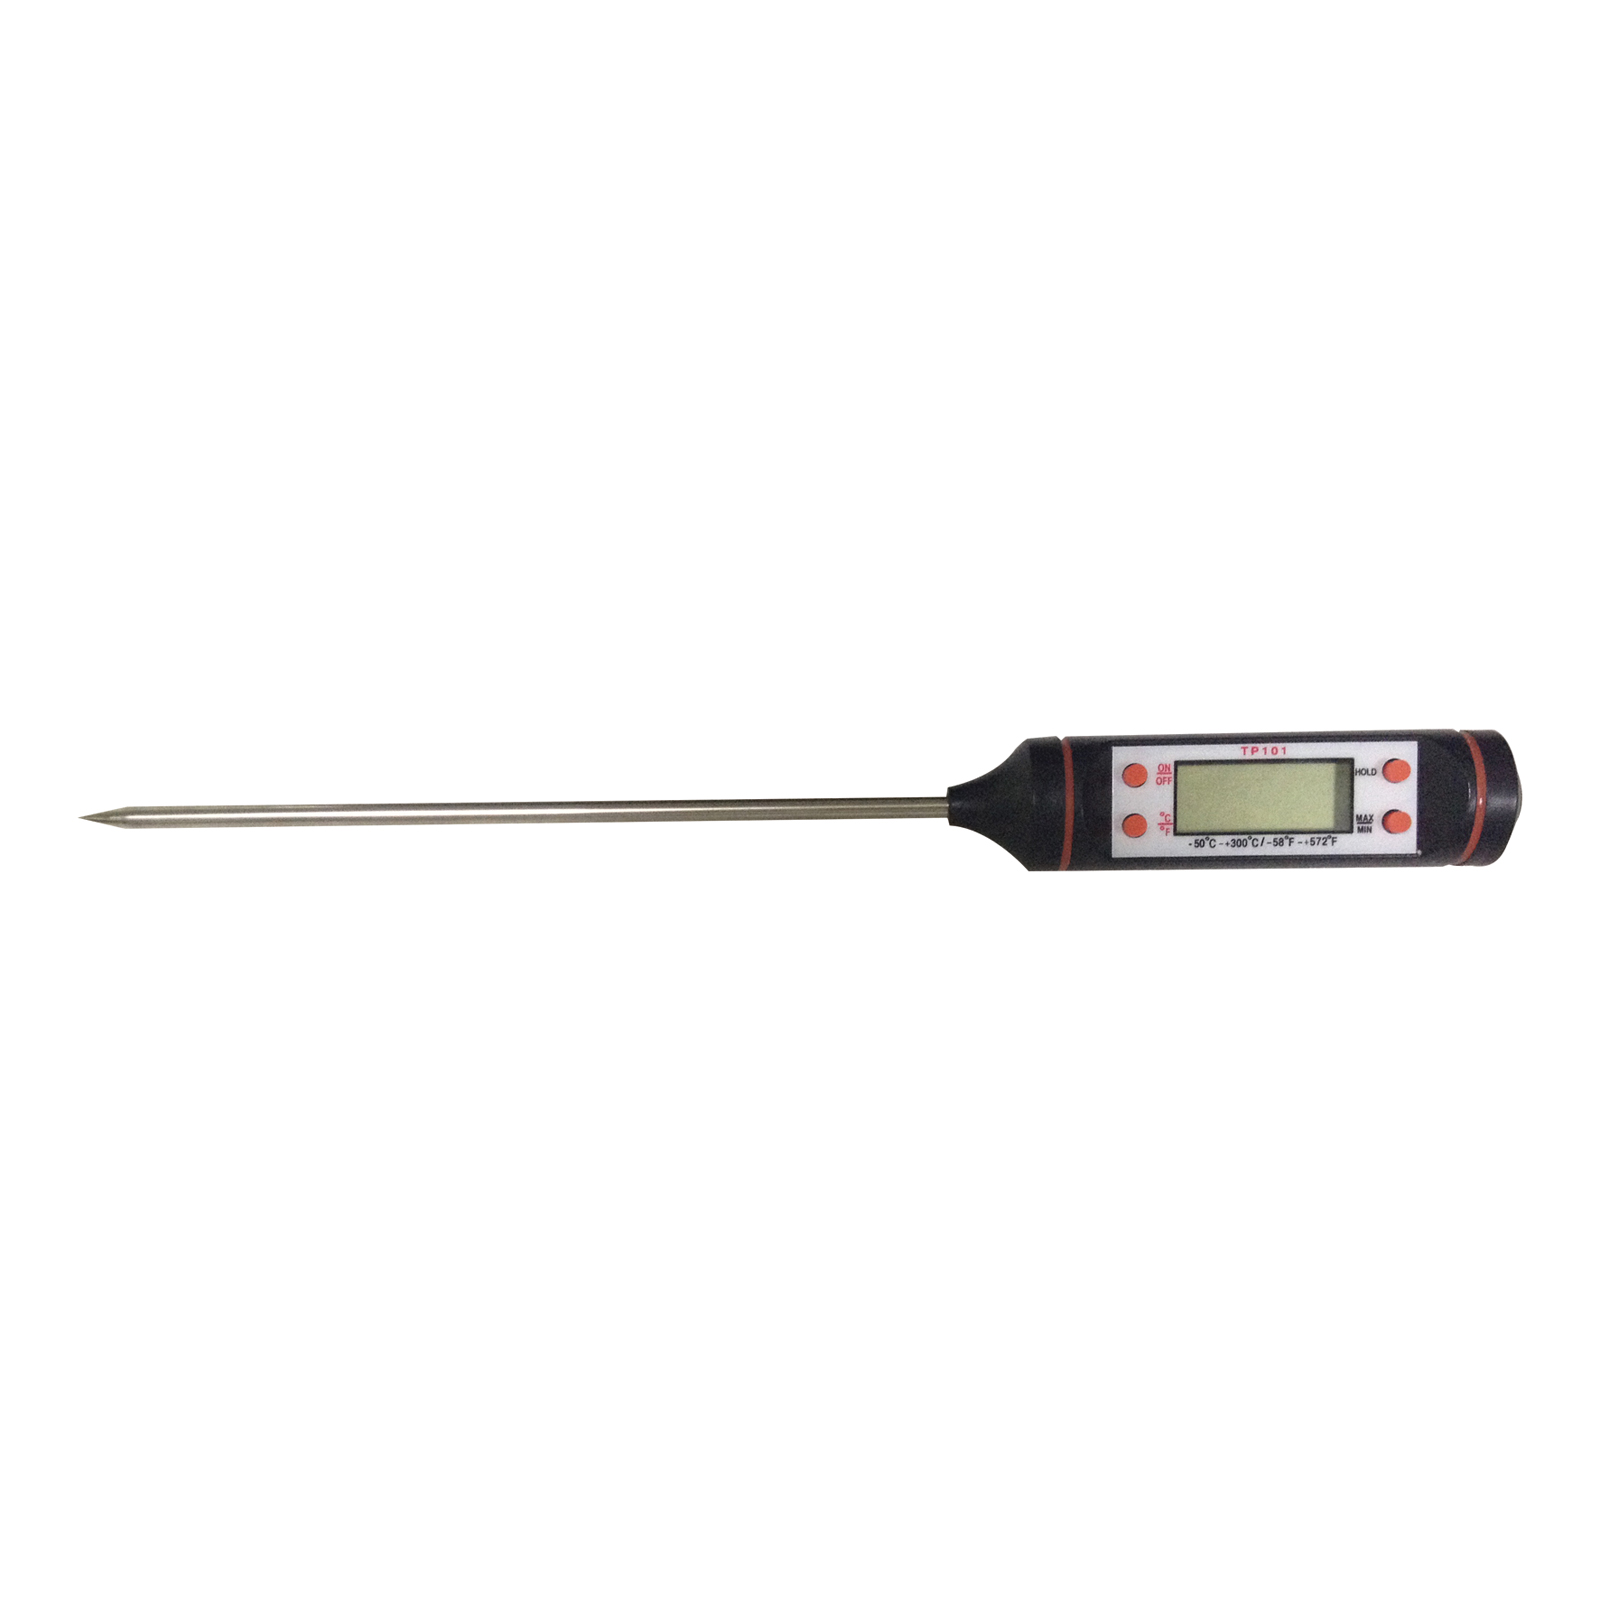 ET2024 Air Conditioning Thermometer